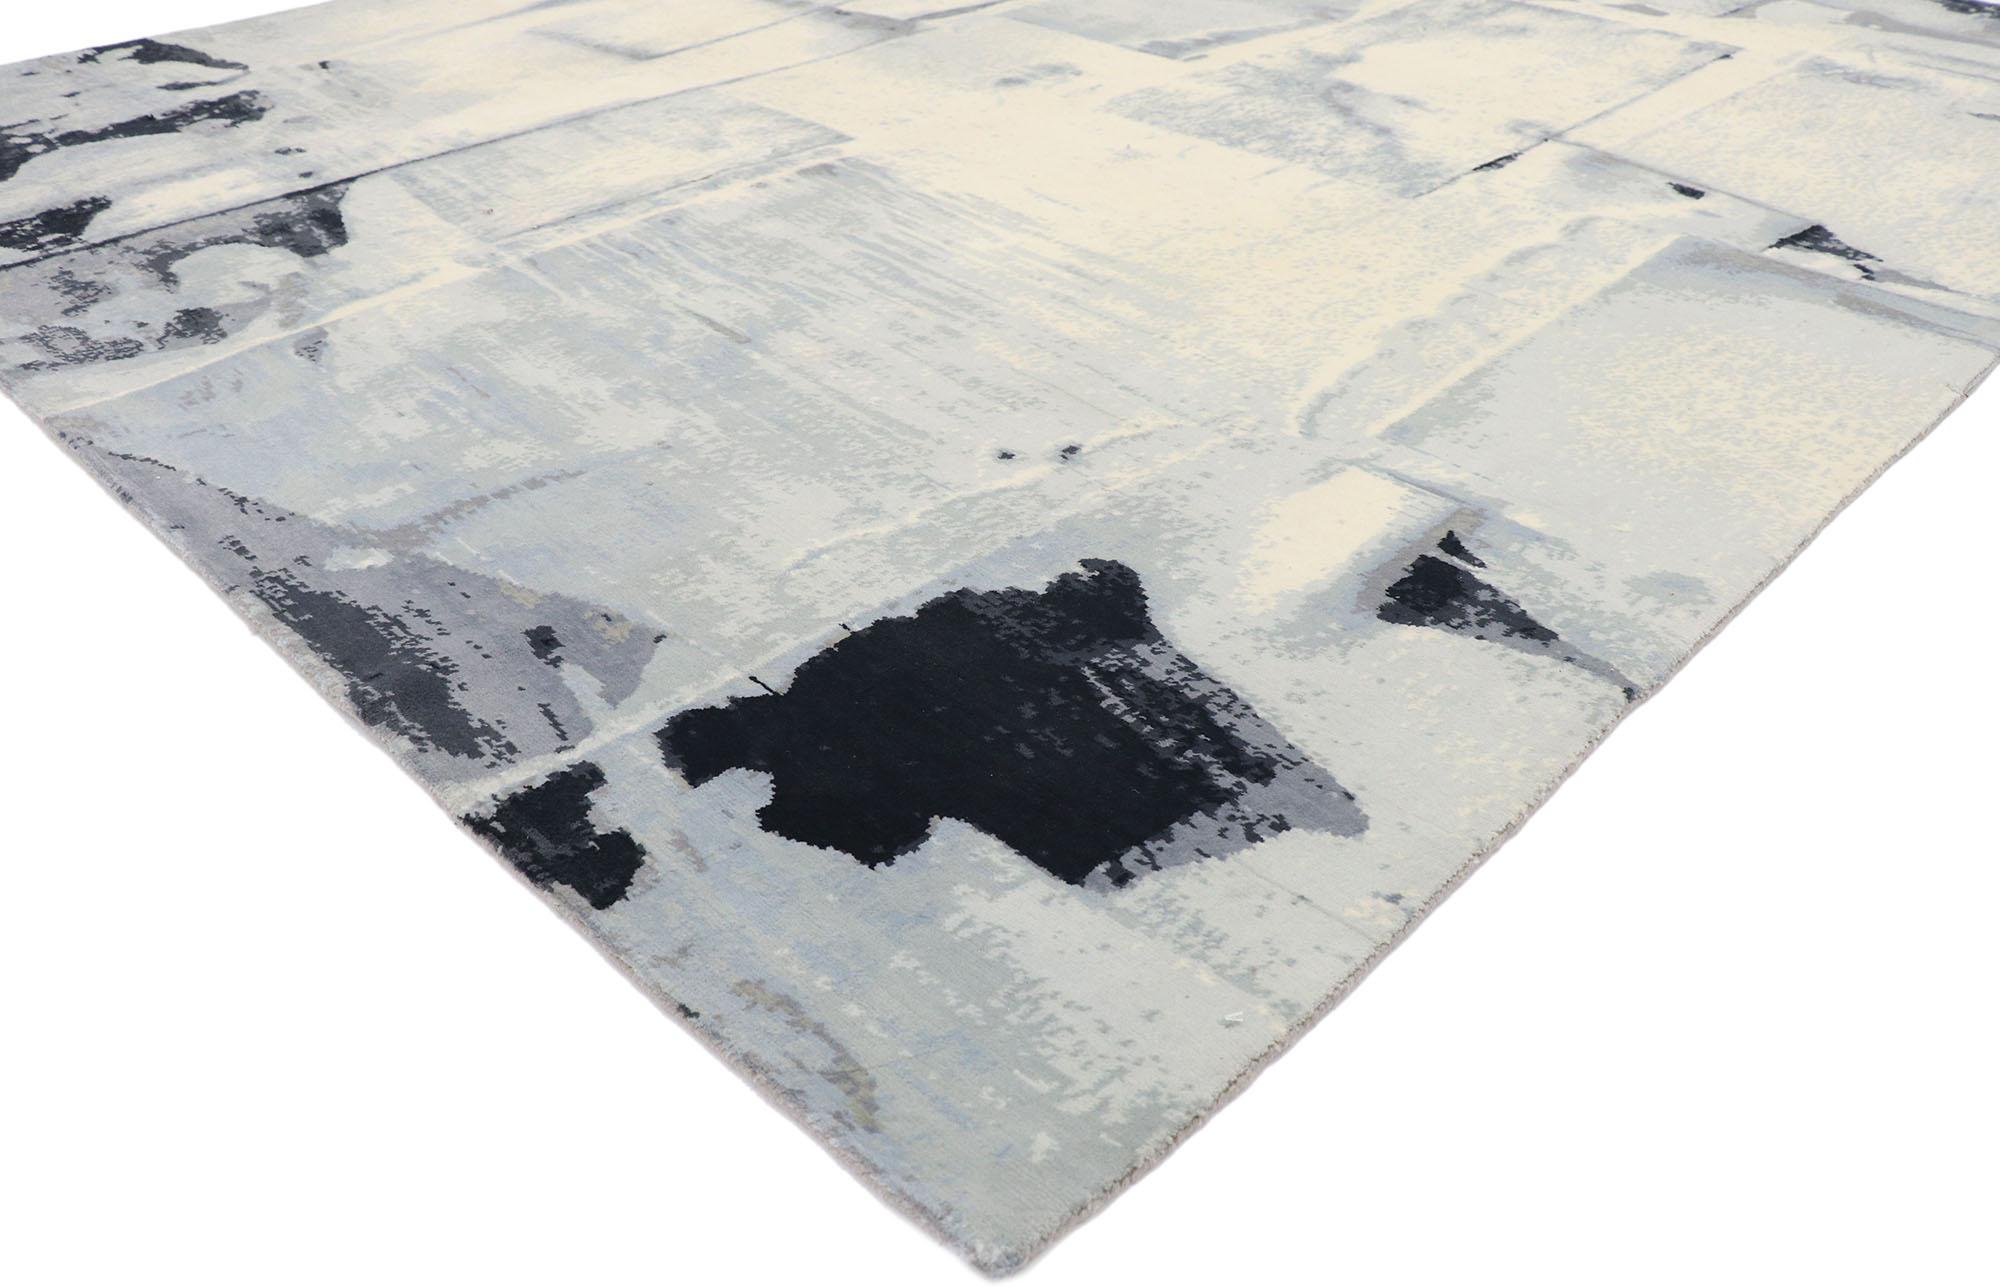 30315 New Monochrome Contemporary Abstract Rug, 08'01 x 09'11.
Emanating Abstract Expressionist style, this hand knotted wool contemporary area rug draws inspiration from Franz Kline and Willem de Kooning. The stark paint brush stroke pattern and